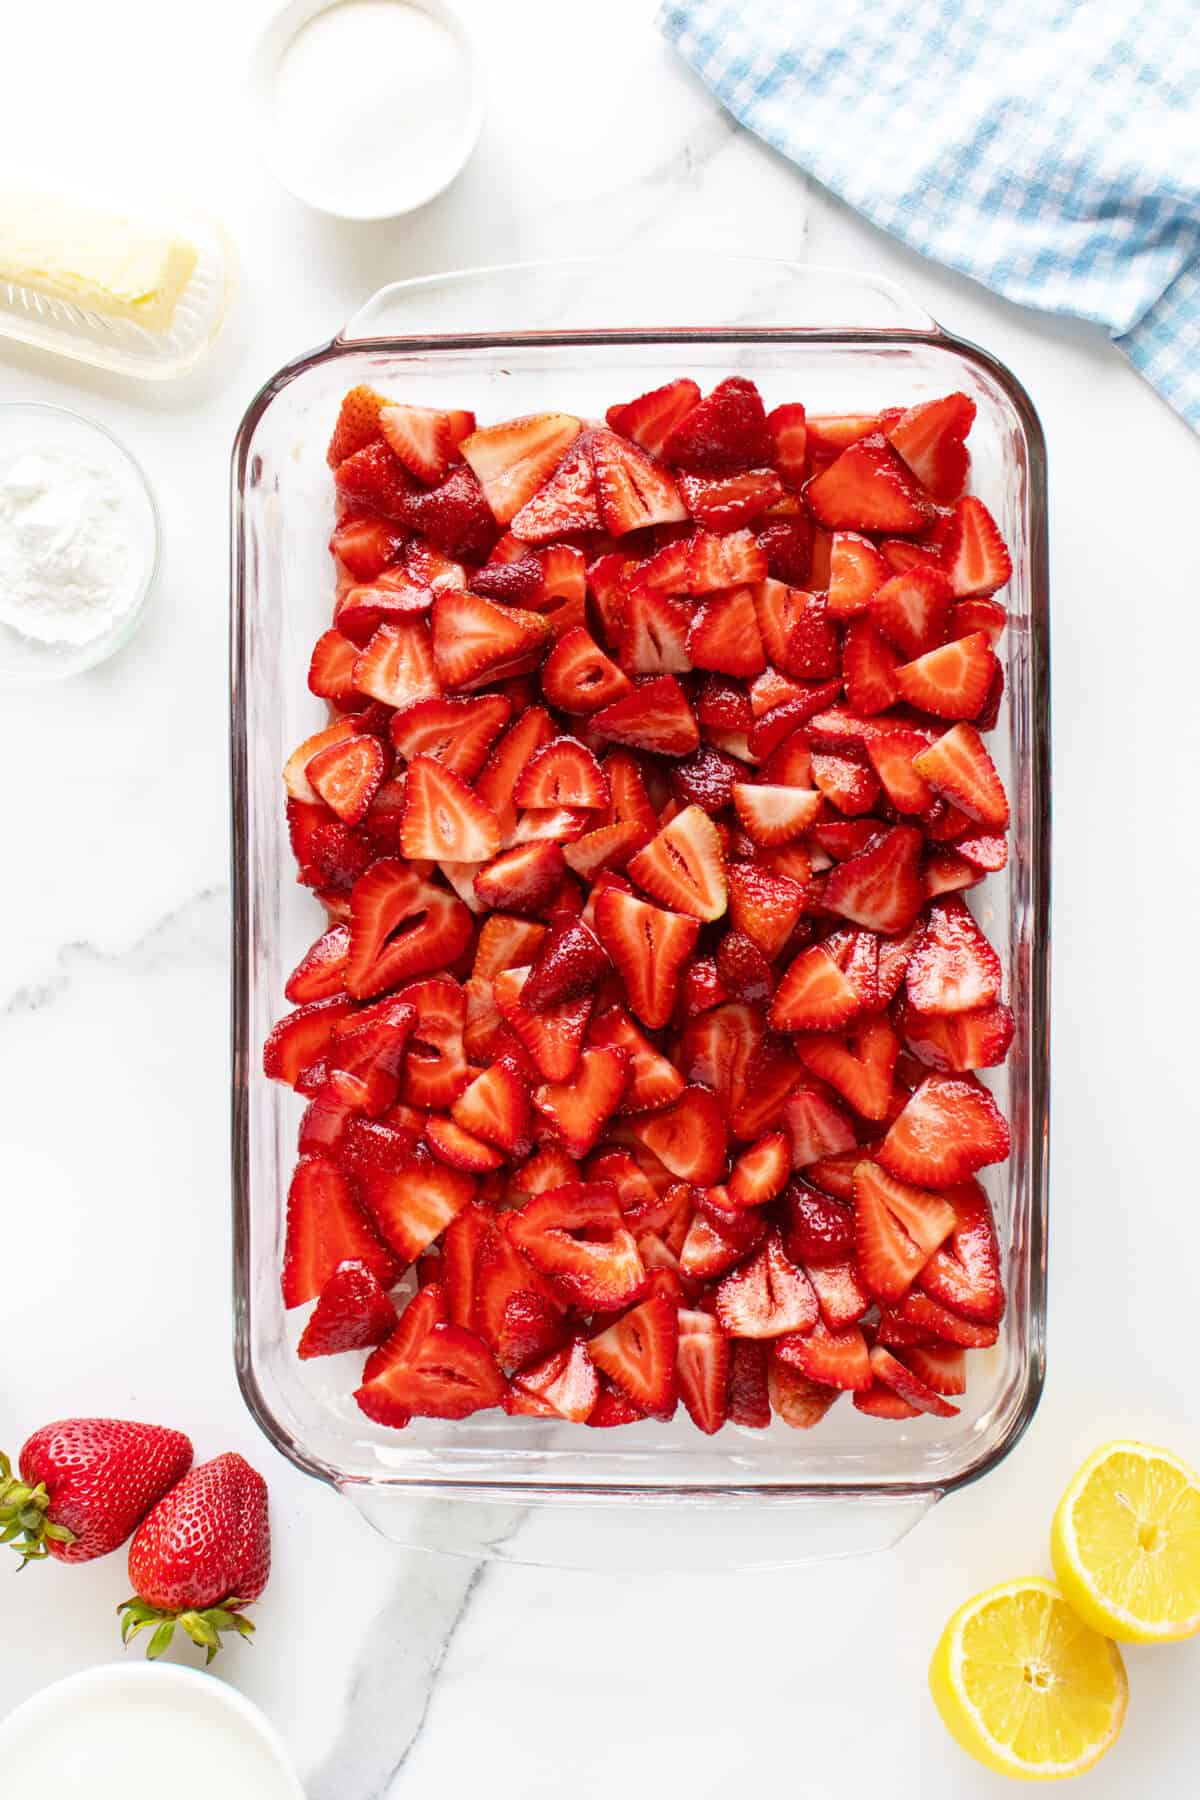 Strawberry Cobbler strawberries in a baking pan